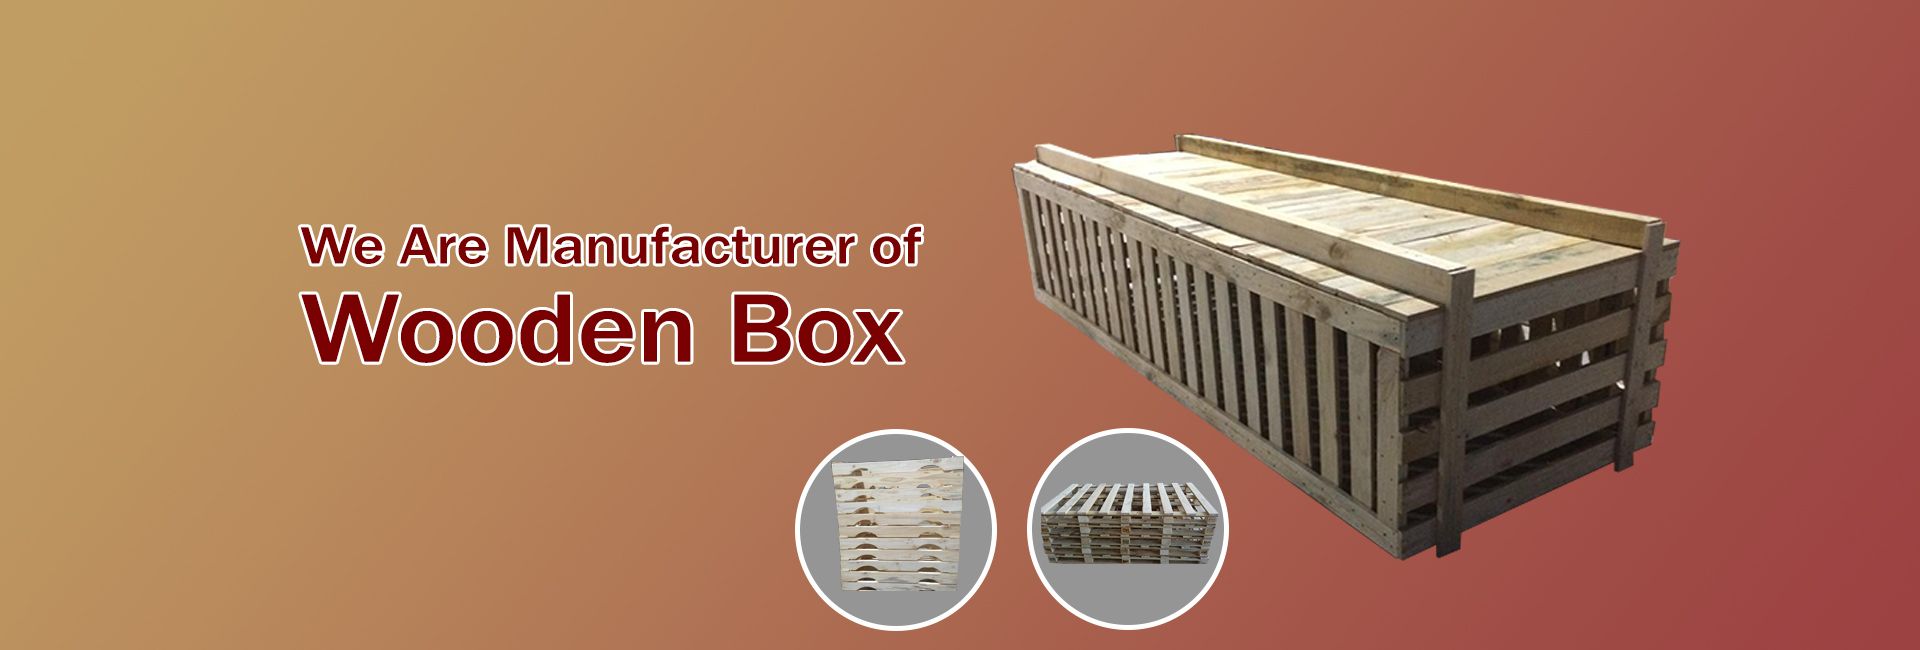 Wooden Box, Wooden Packaging Box, Wooden Pallets Manufacturer, Suppliers, Dealers, India